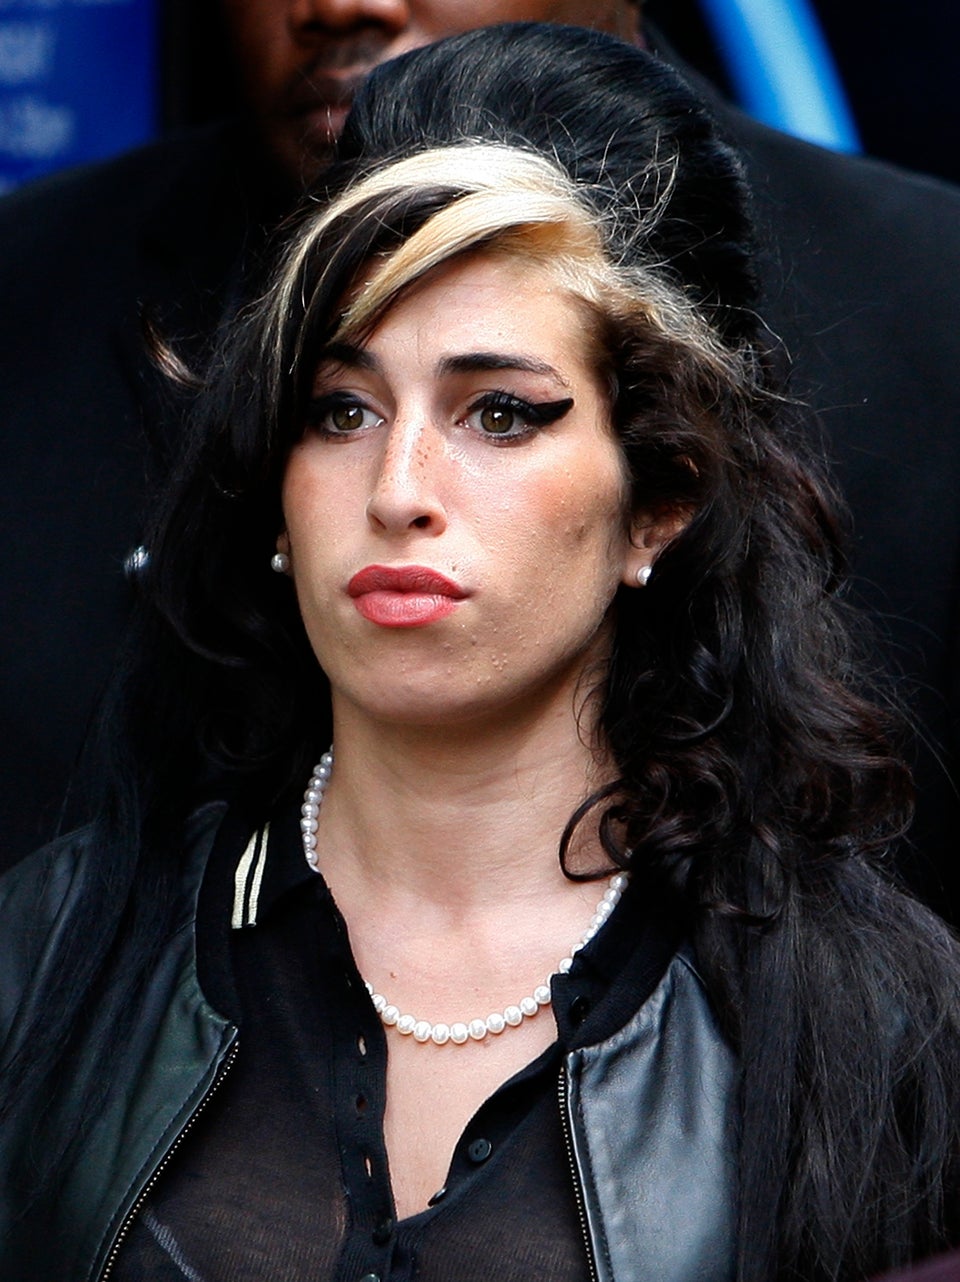 Amy Winehouse Was Drug-Free at Time of Death